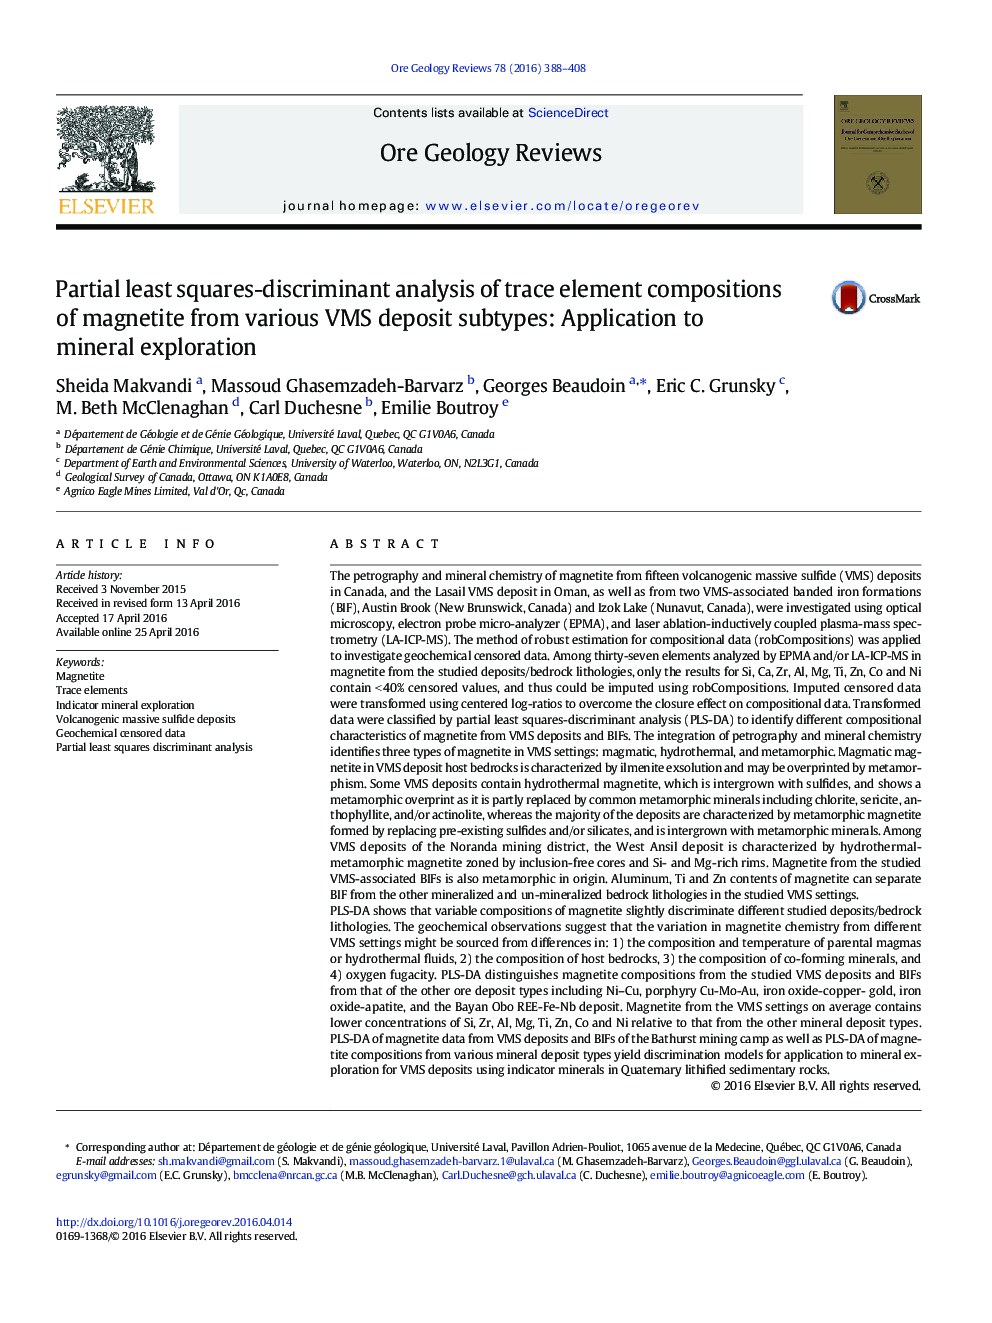 Partial least squares-discriminant analysis of trace element compositions of magnetite from various VMS deposit subtypes: Application to mineral exploration